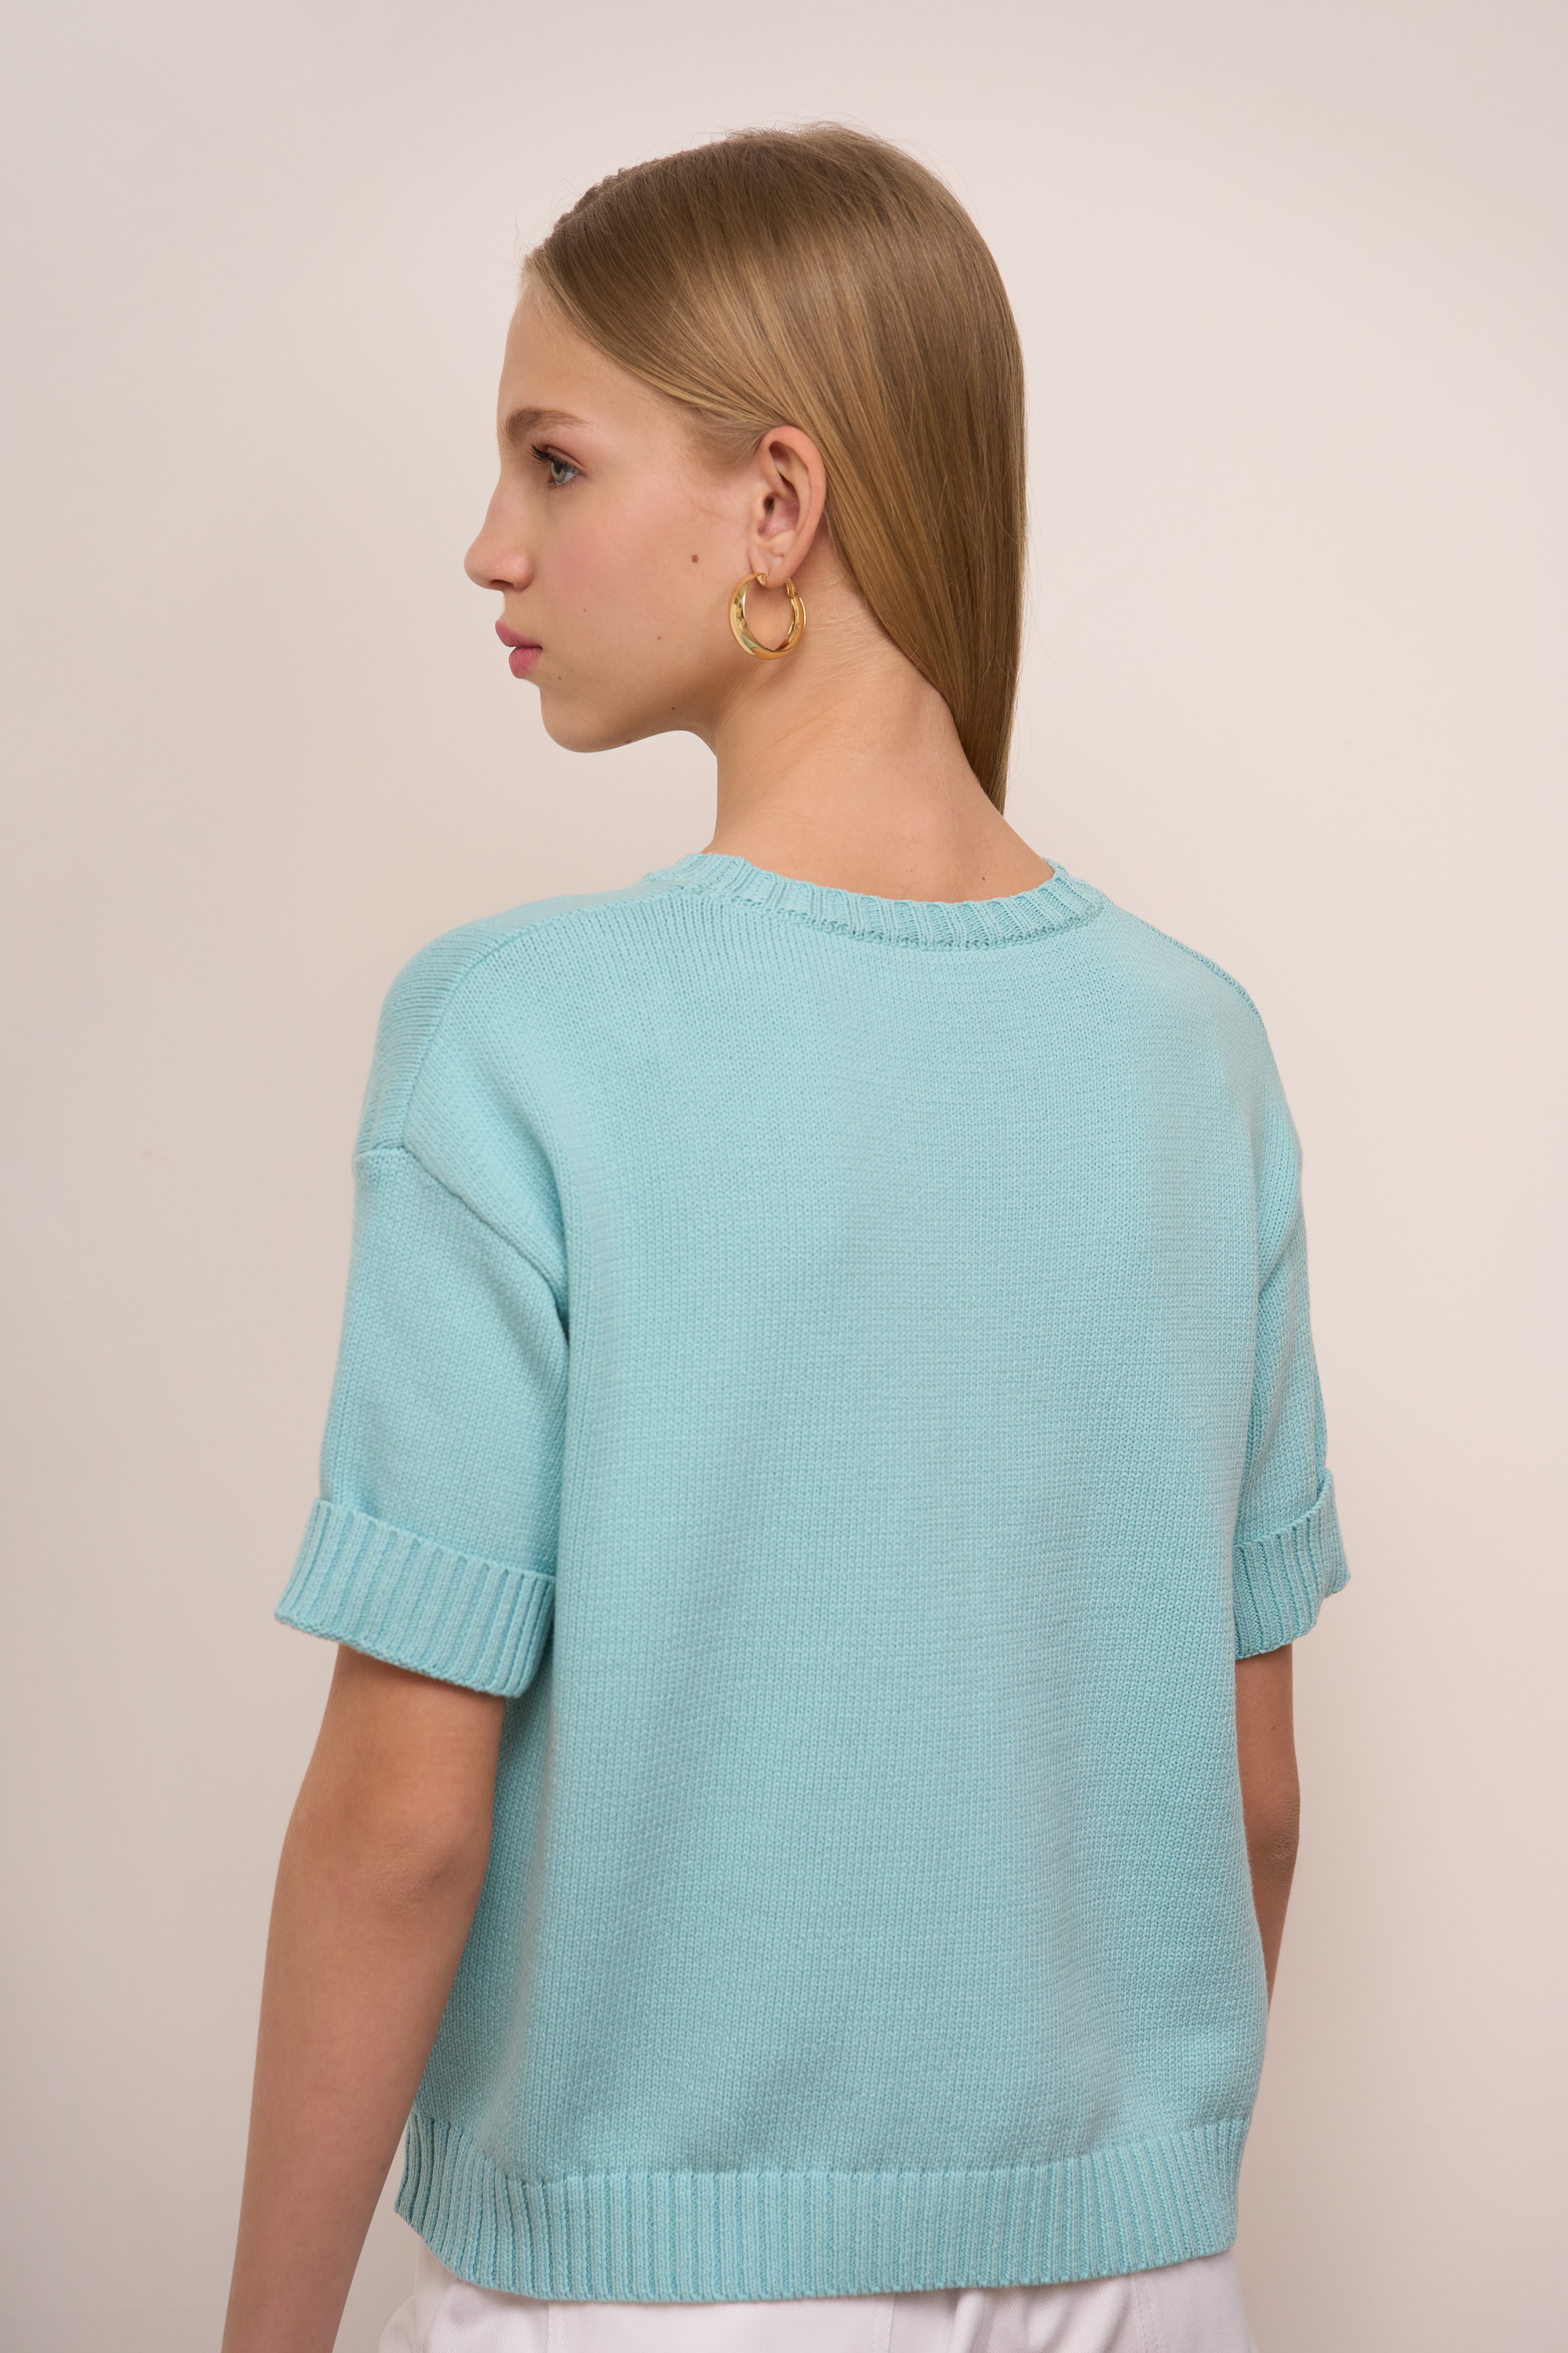 Pull-over 3059-103 bright blue from BRUSNiKA